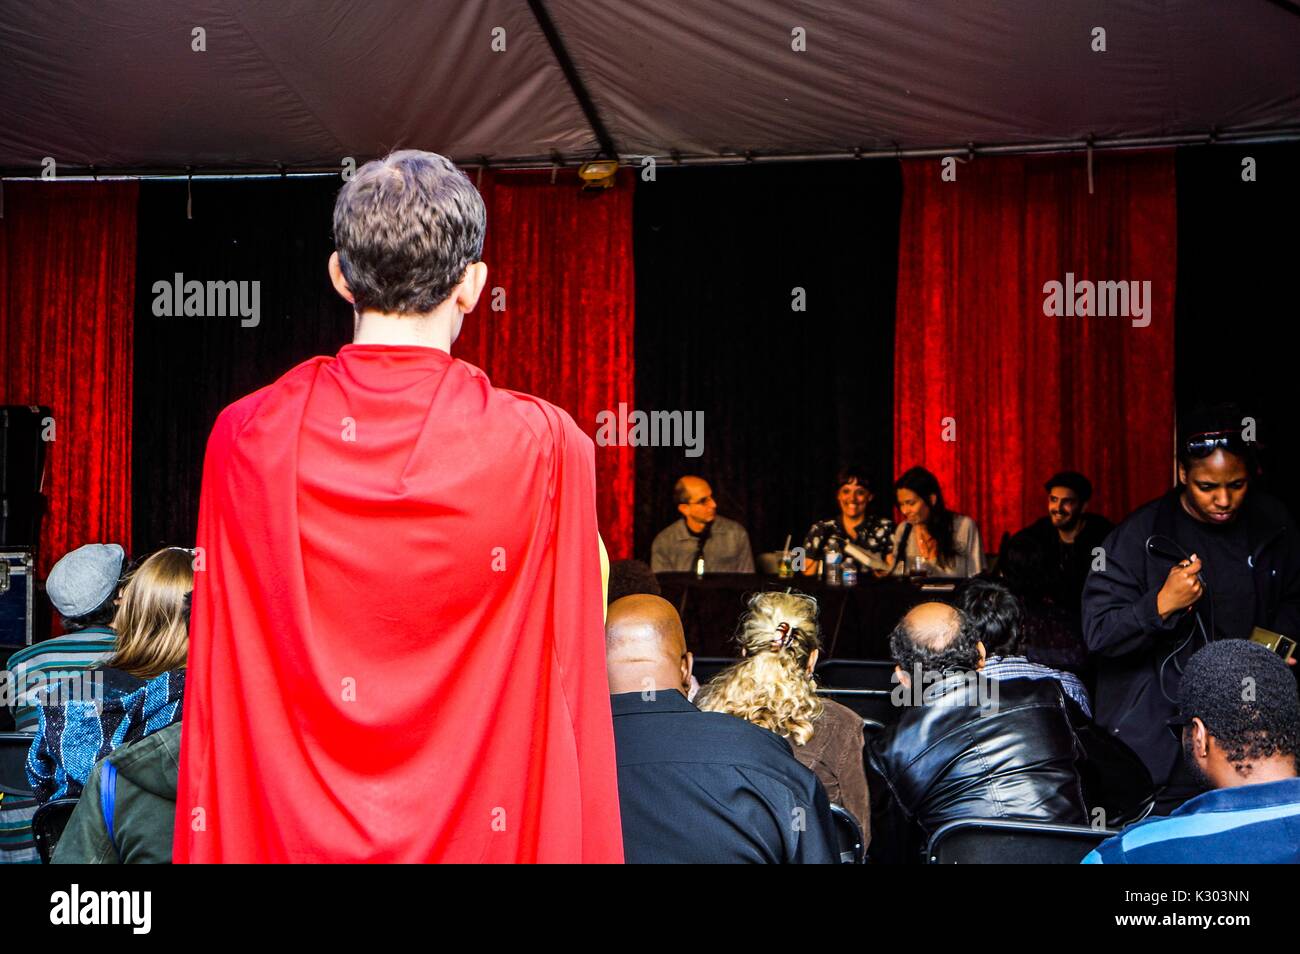 A young man with a red cape stands looking at a panel discussion in front of red drapes with a crowd of people sitting and watching, at the Baltimore Book Festival, Baltimore, Maryland, September, 2013. Stock Photo